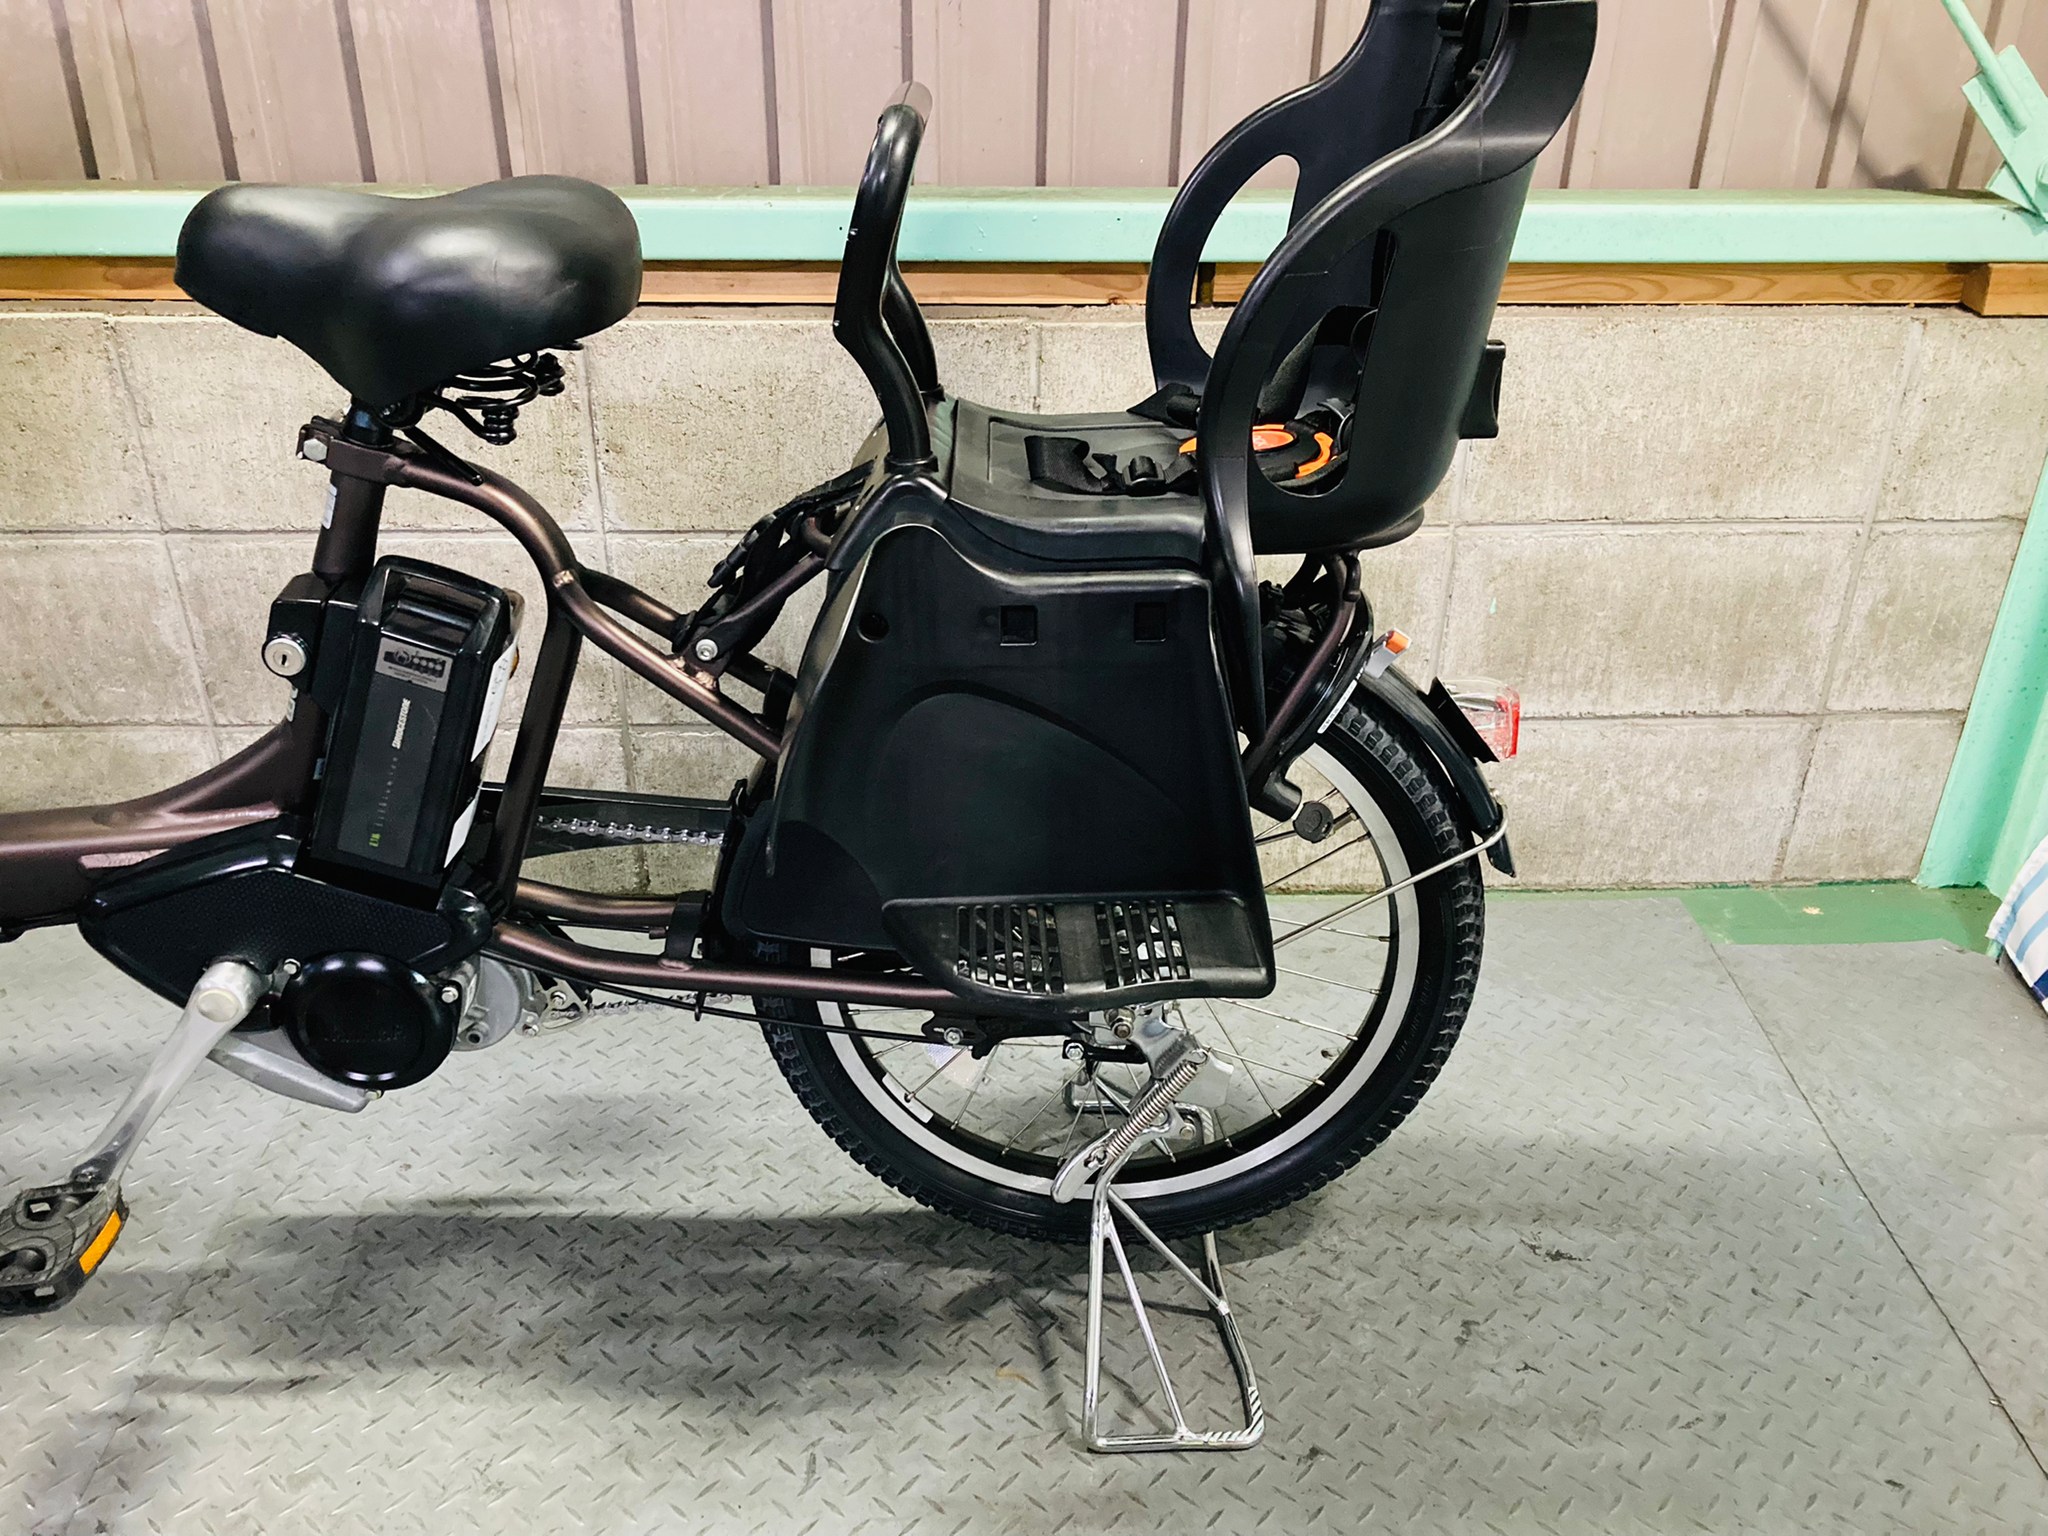 SOLD OUT】電動自転車 ブリヂストン アンジェリーノ 20インチ 8.7ah 